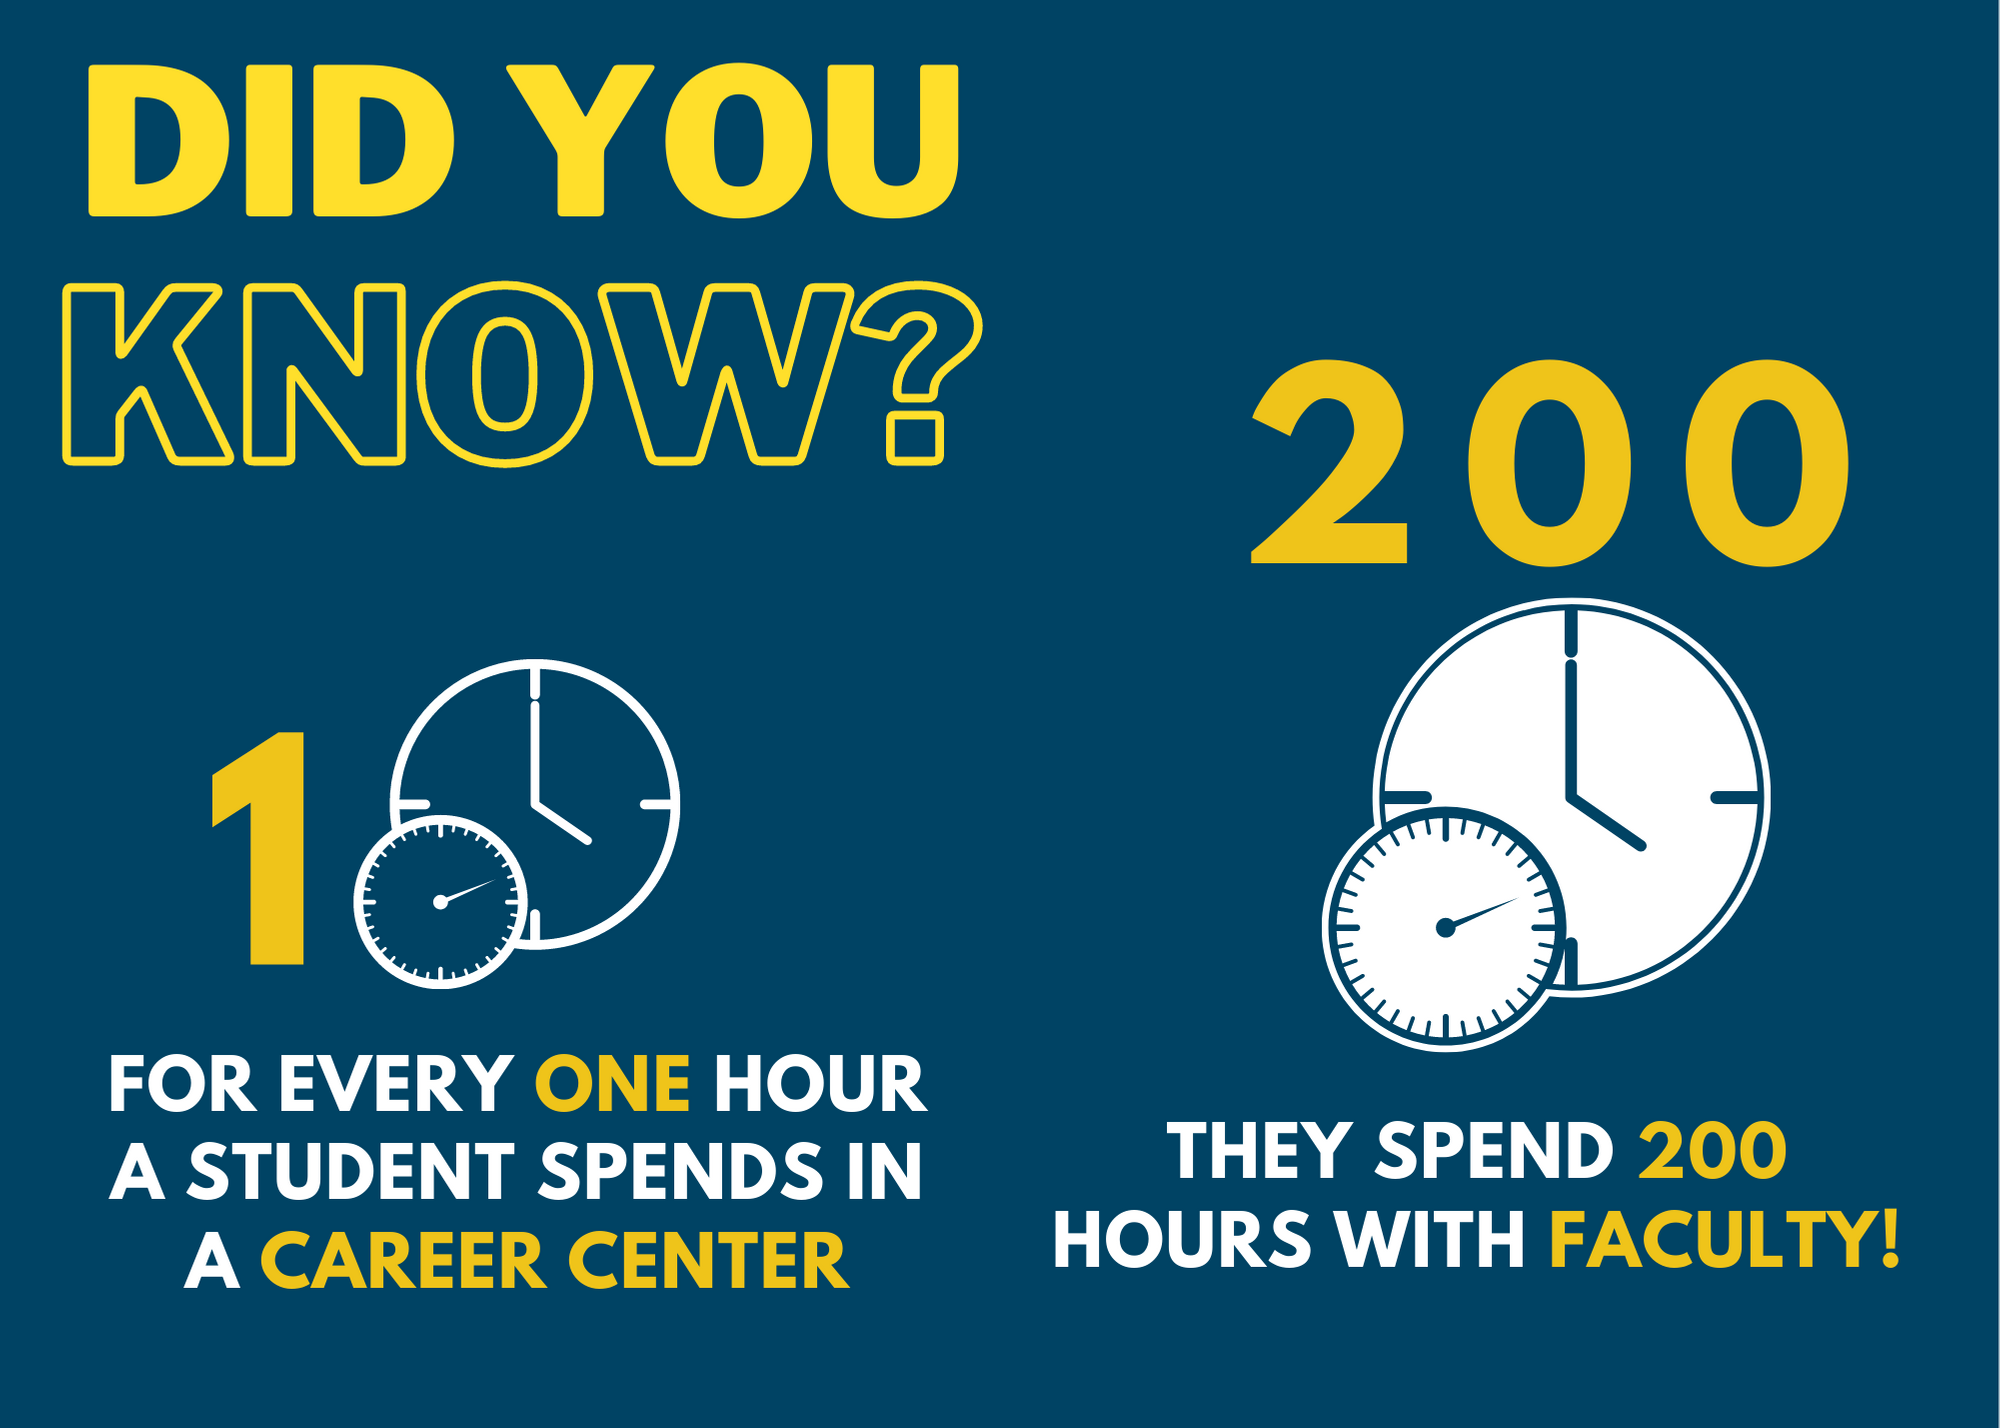 For every one hour a student spends engaging with a Career Center, the spend 200 hours with faculty.